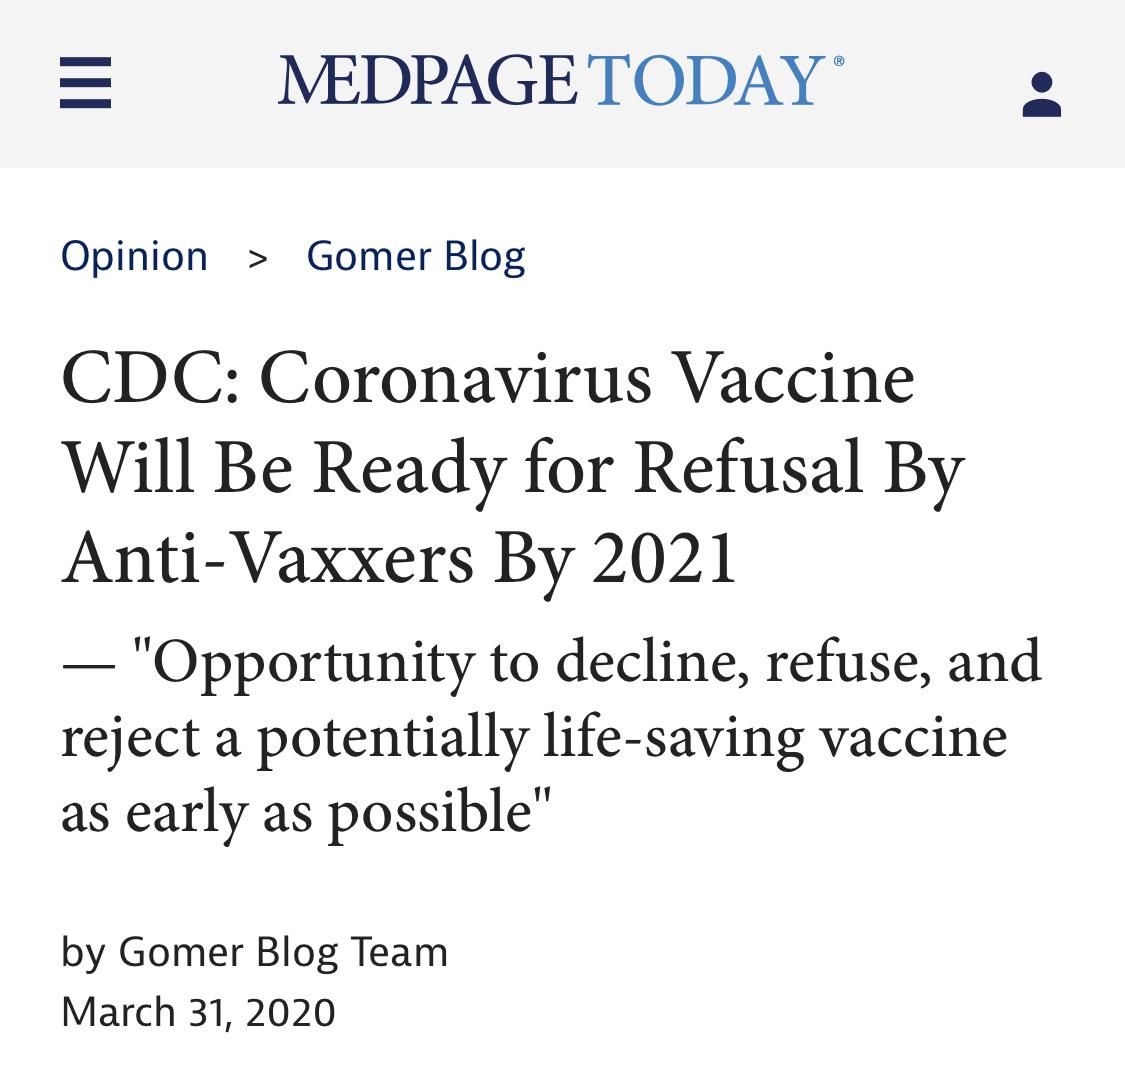 GomerBlog throwing some shade at the antivaxxers!